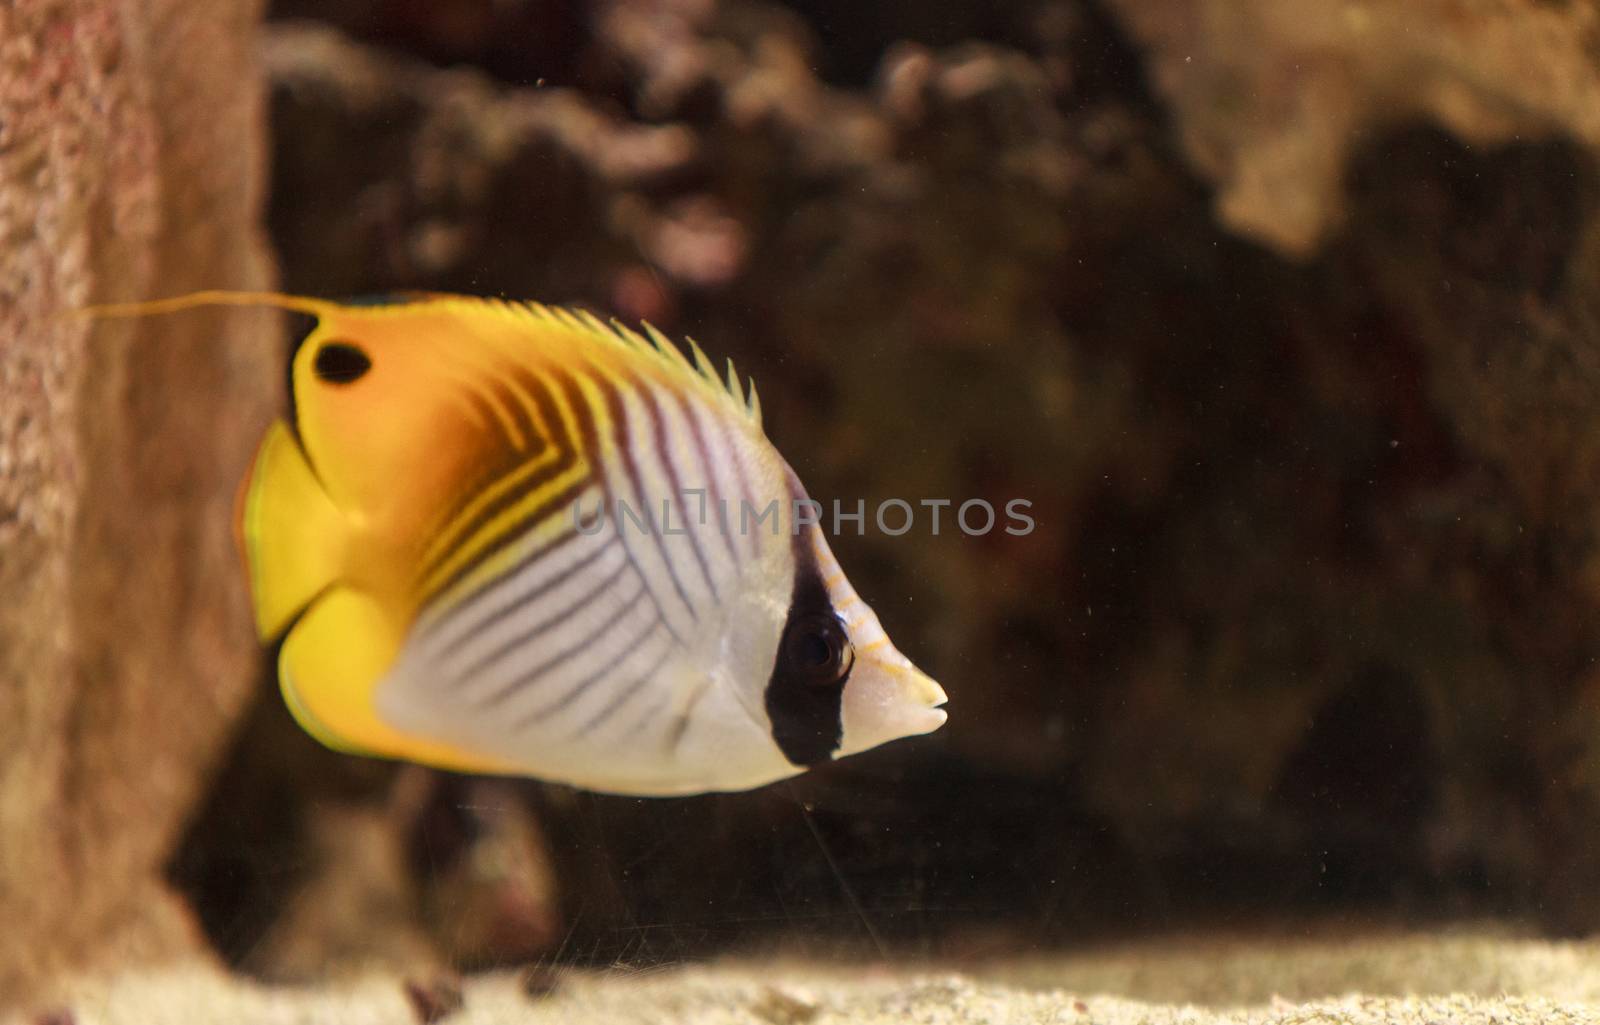 Threadfin butterflyfish, Chaetodon auriga, is a yellow, white and black fish with a sharp, pointed mouth found on the marine reef.